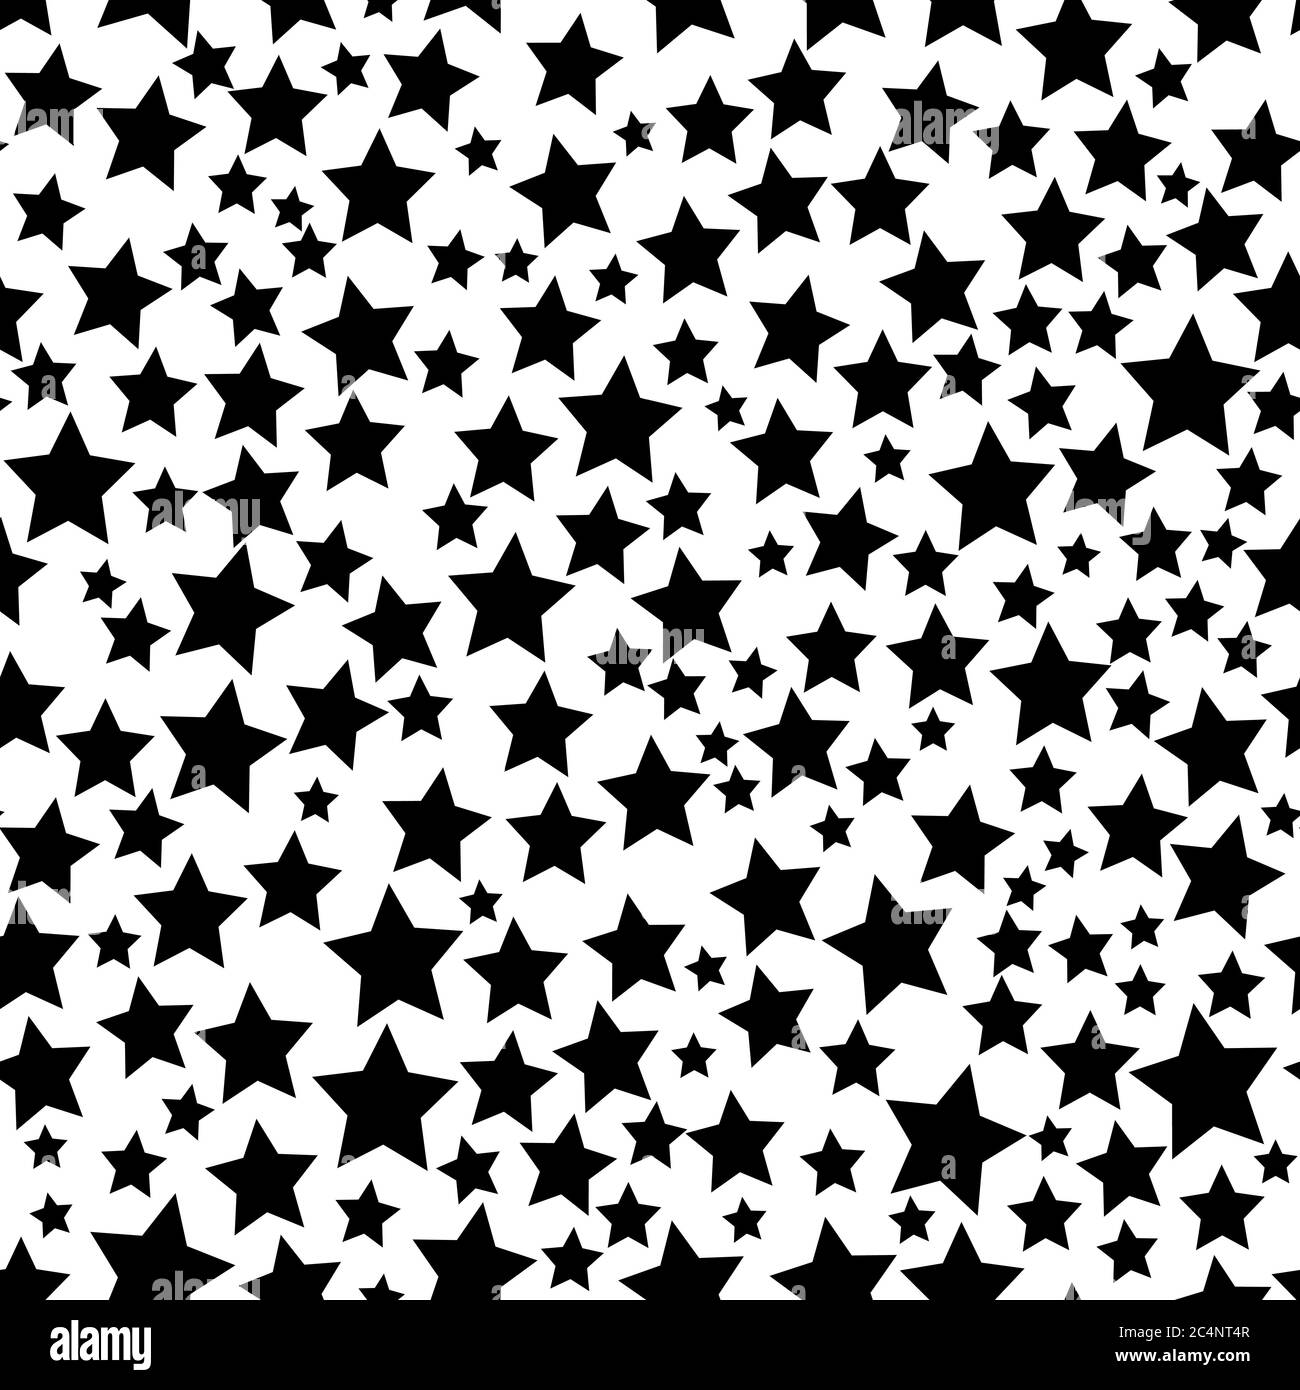 Abstract seamless pattern of stars of different sizes in black and white colors Stock Vector